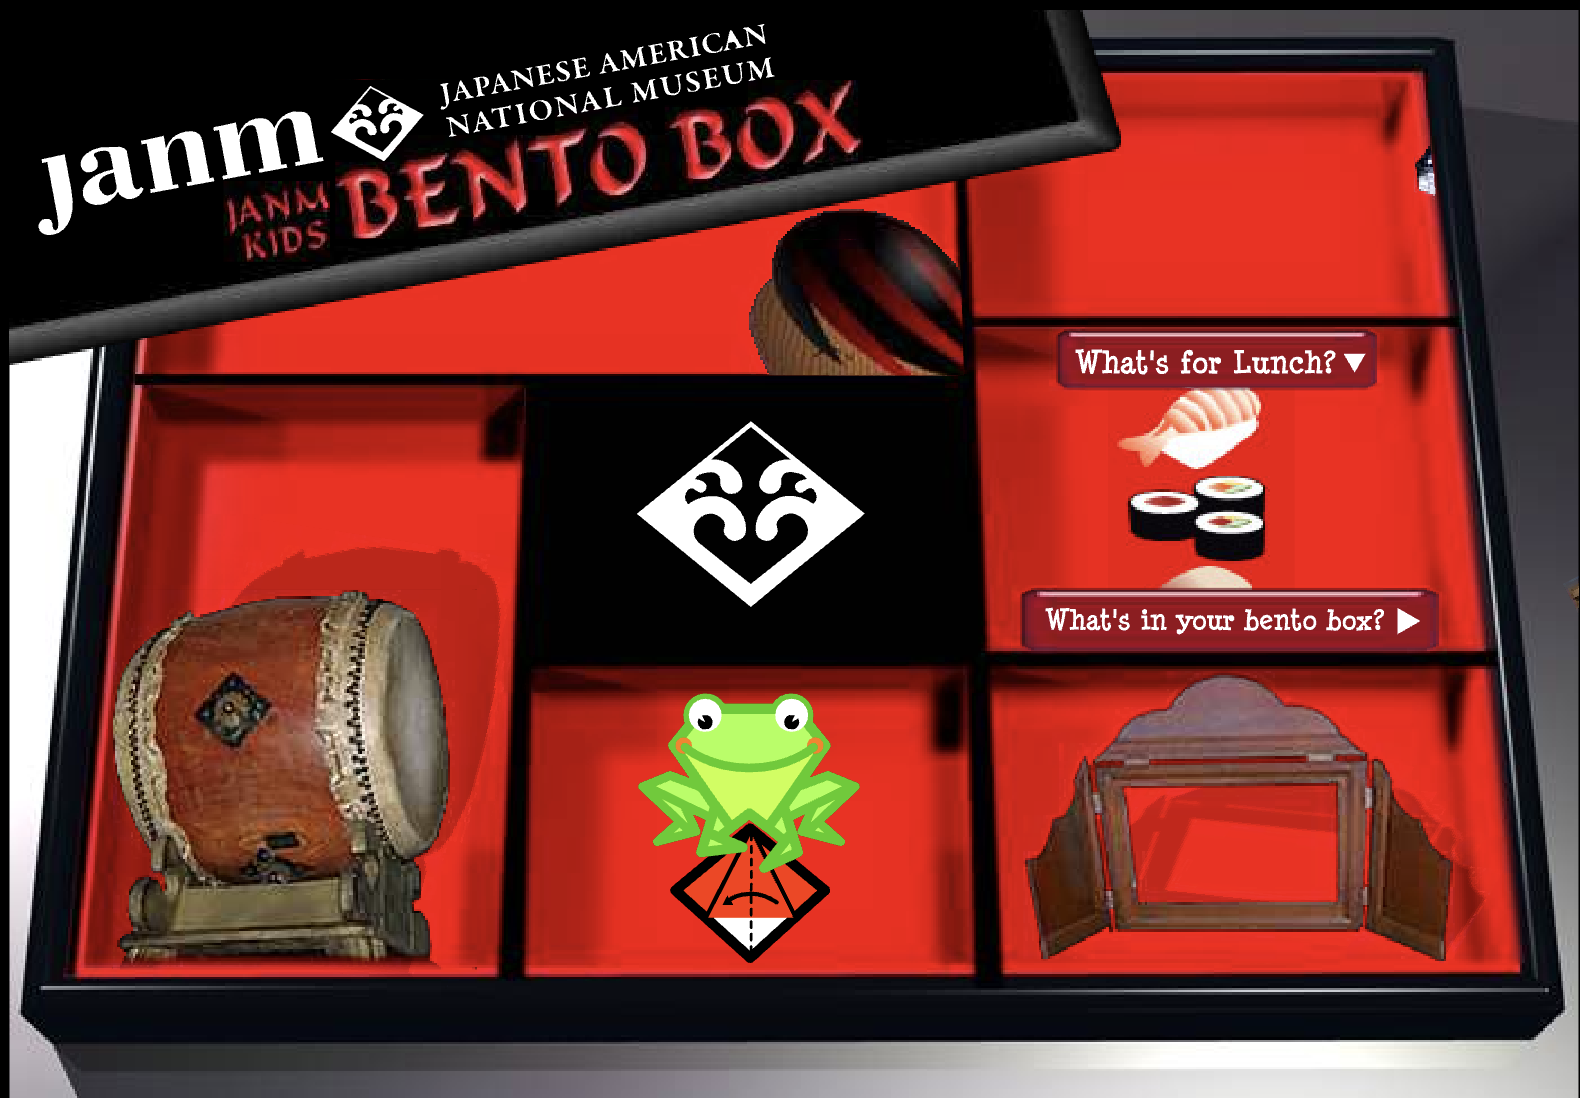 Red background image of a bento box for JANM Kids website